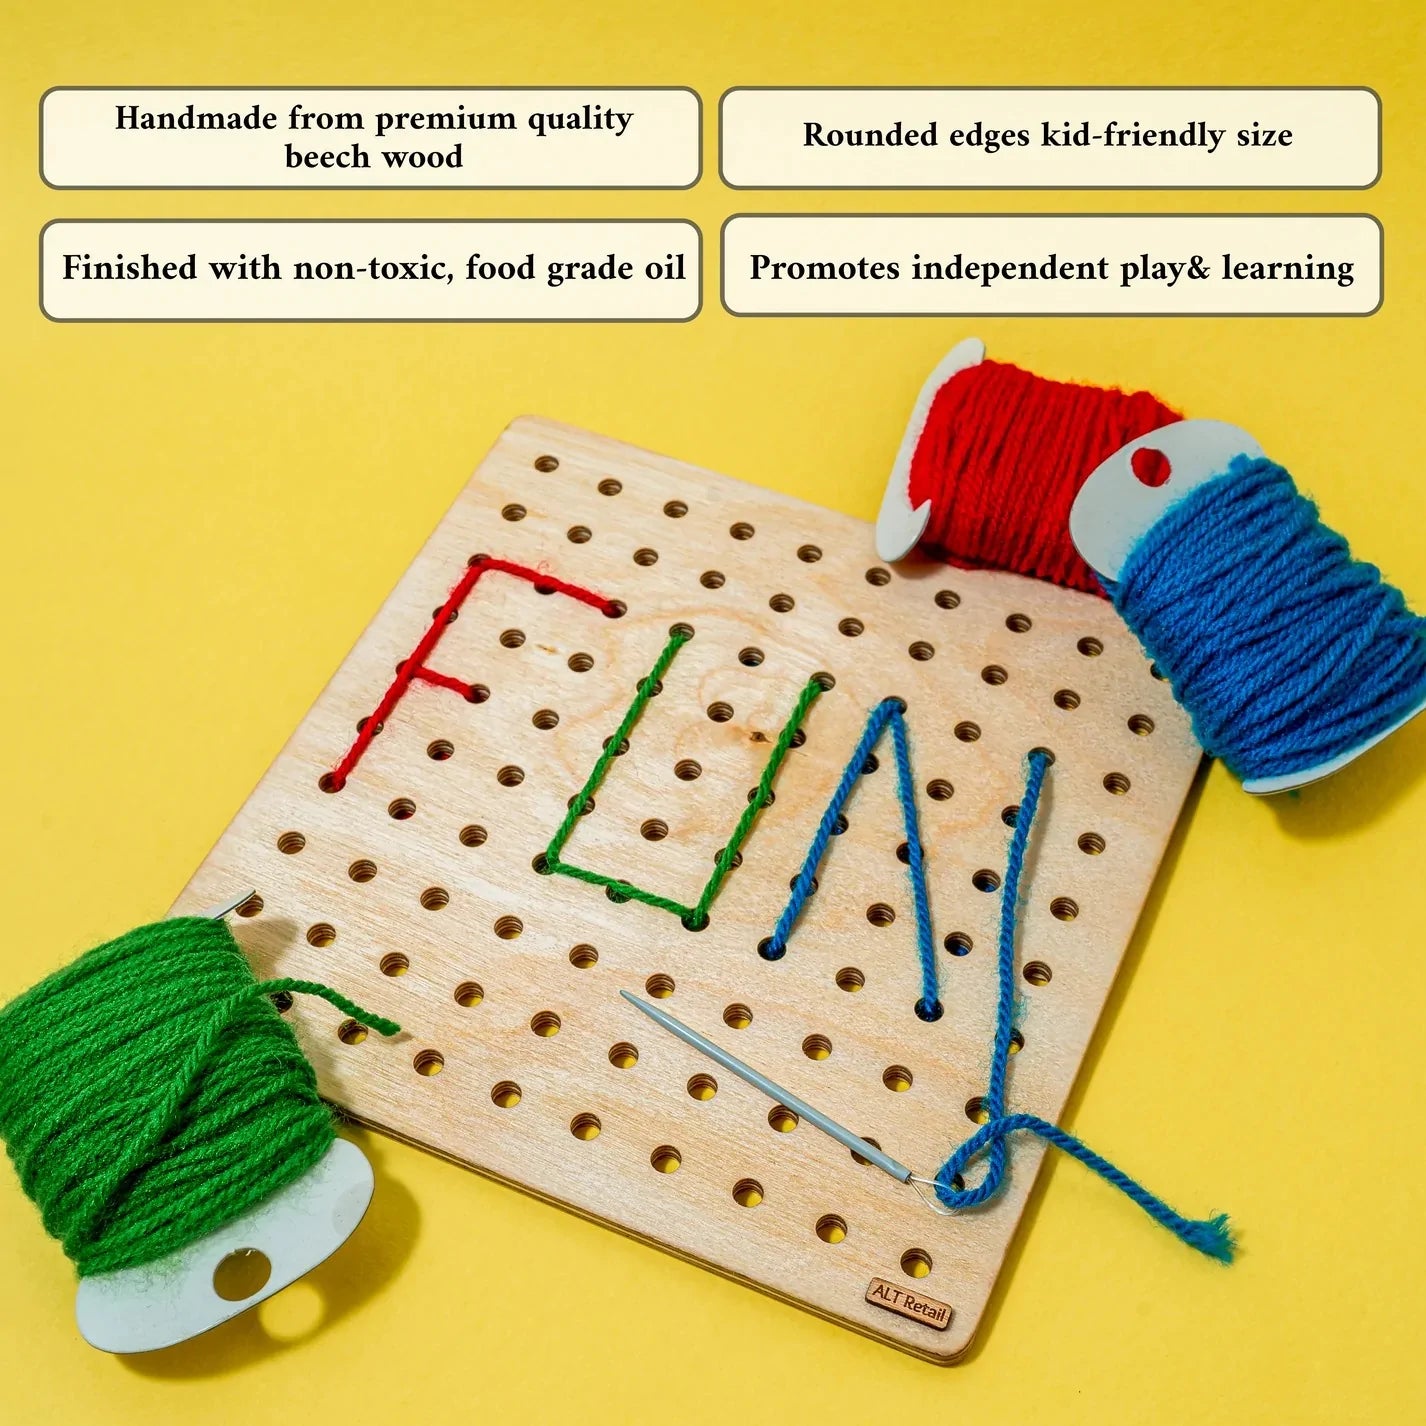 Buy Children's SewingLacing Wooden Board - Benefits - SkilloToys.com